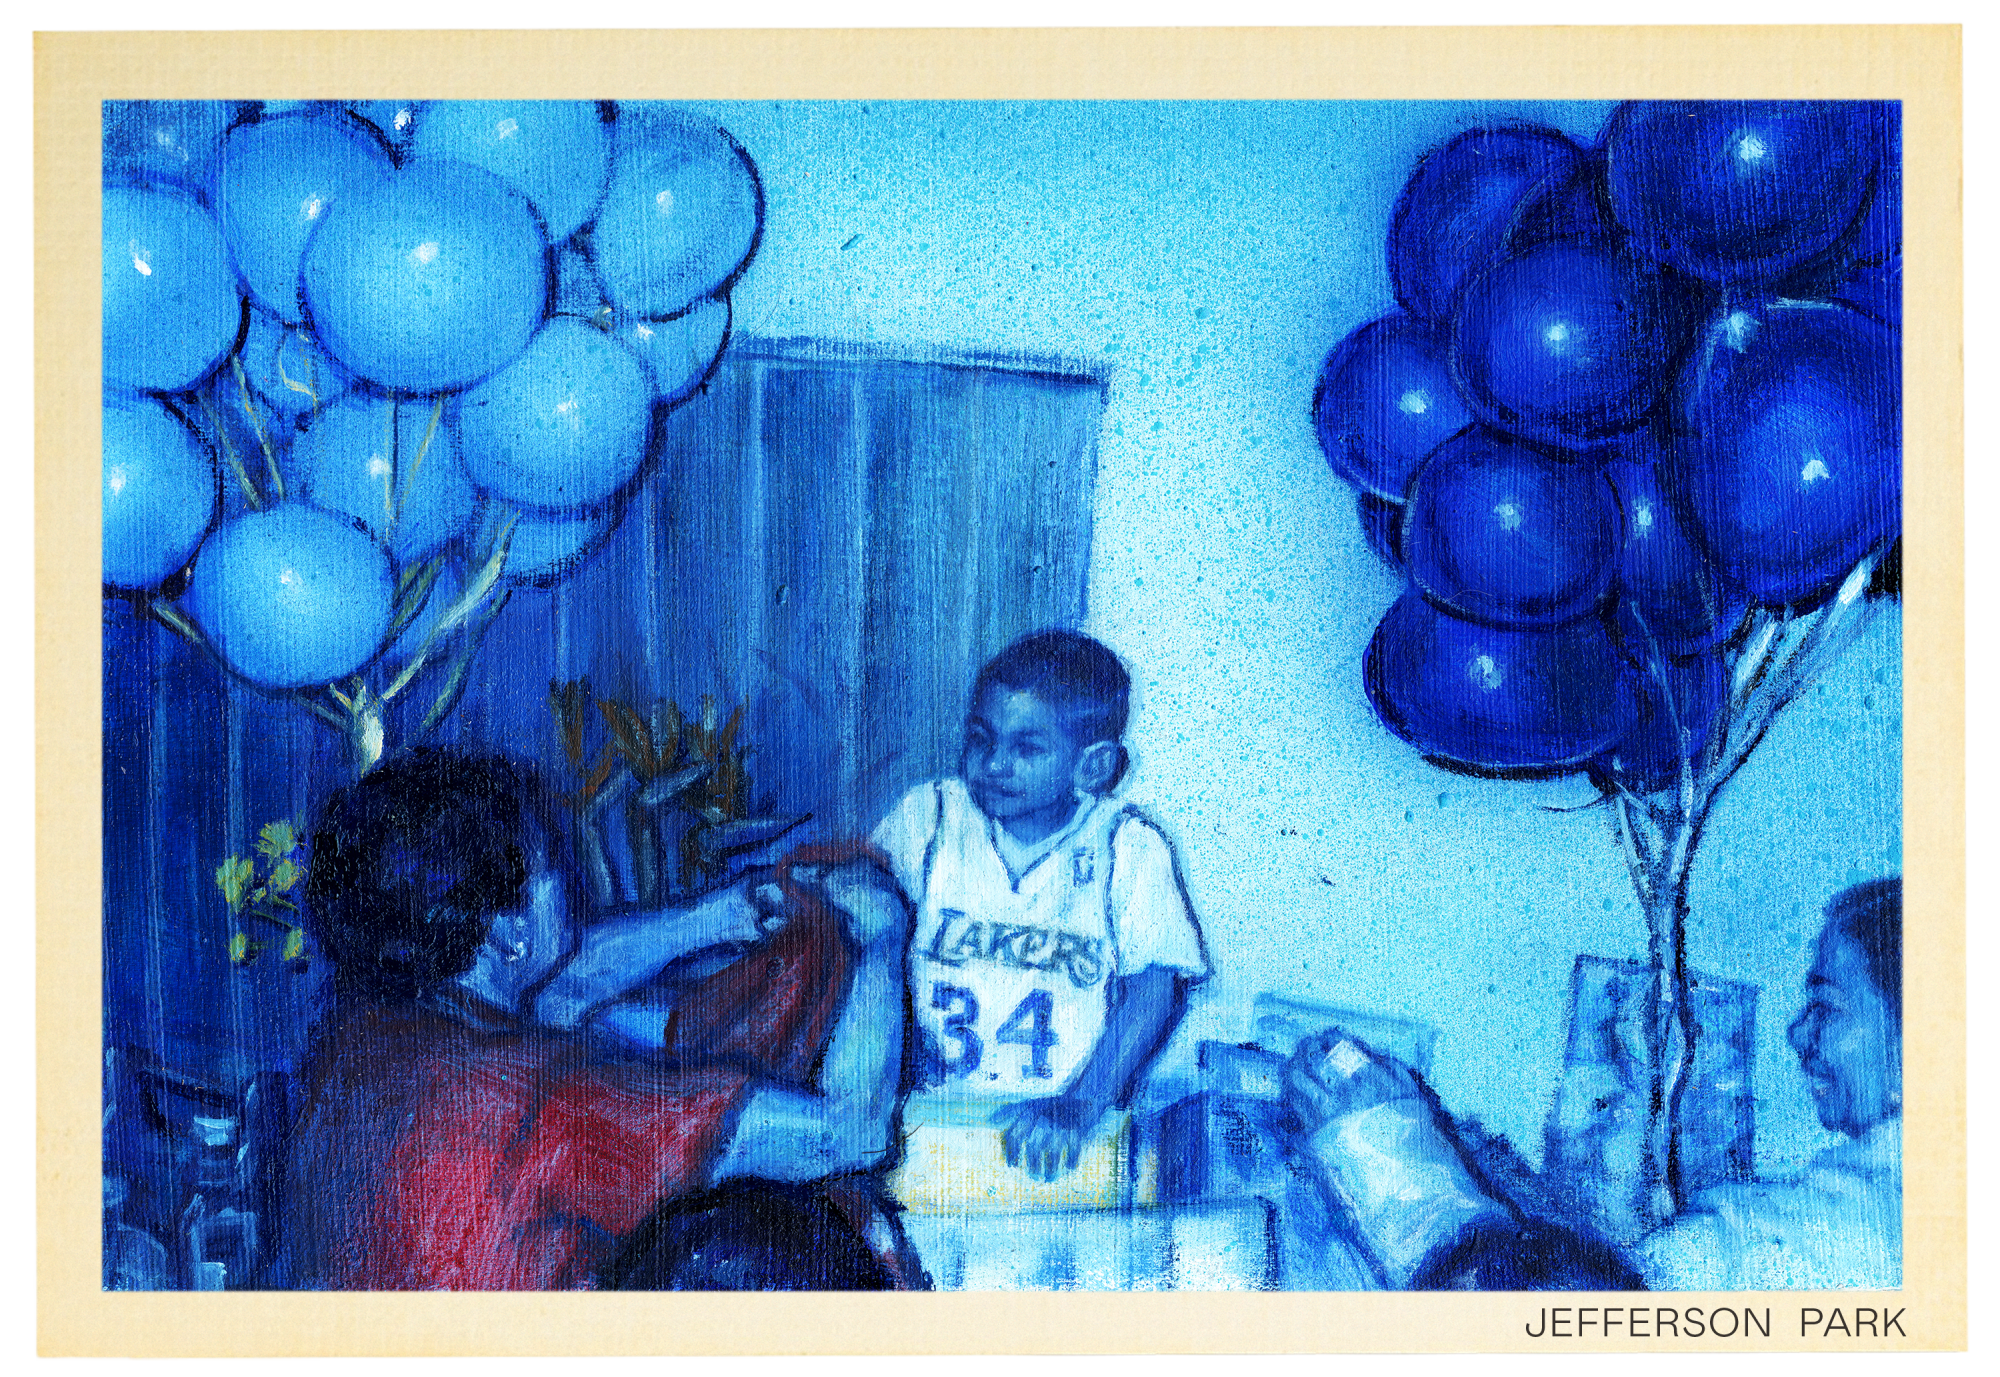 A painting of the artist as a young boy receiving presents on his birthday